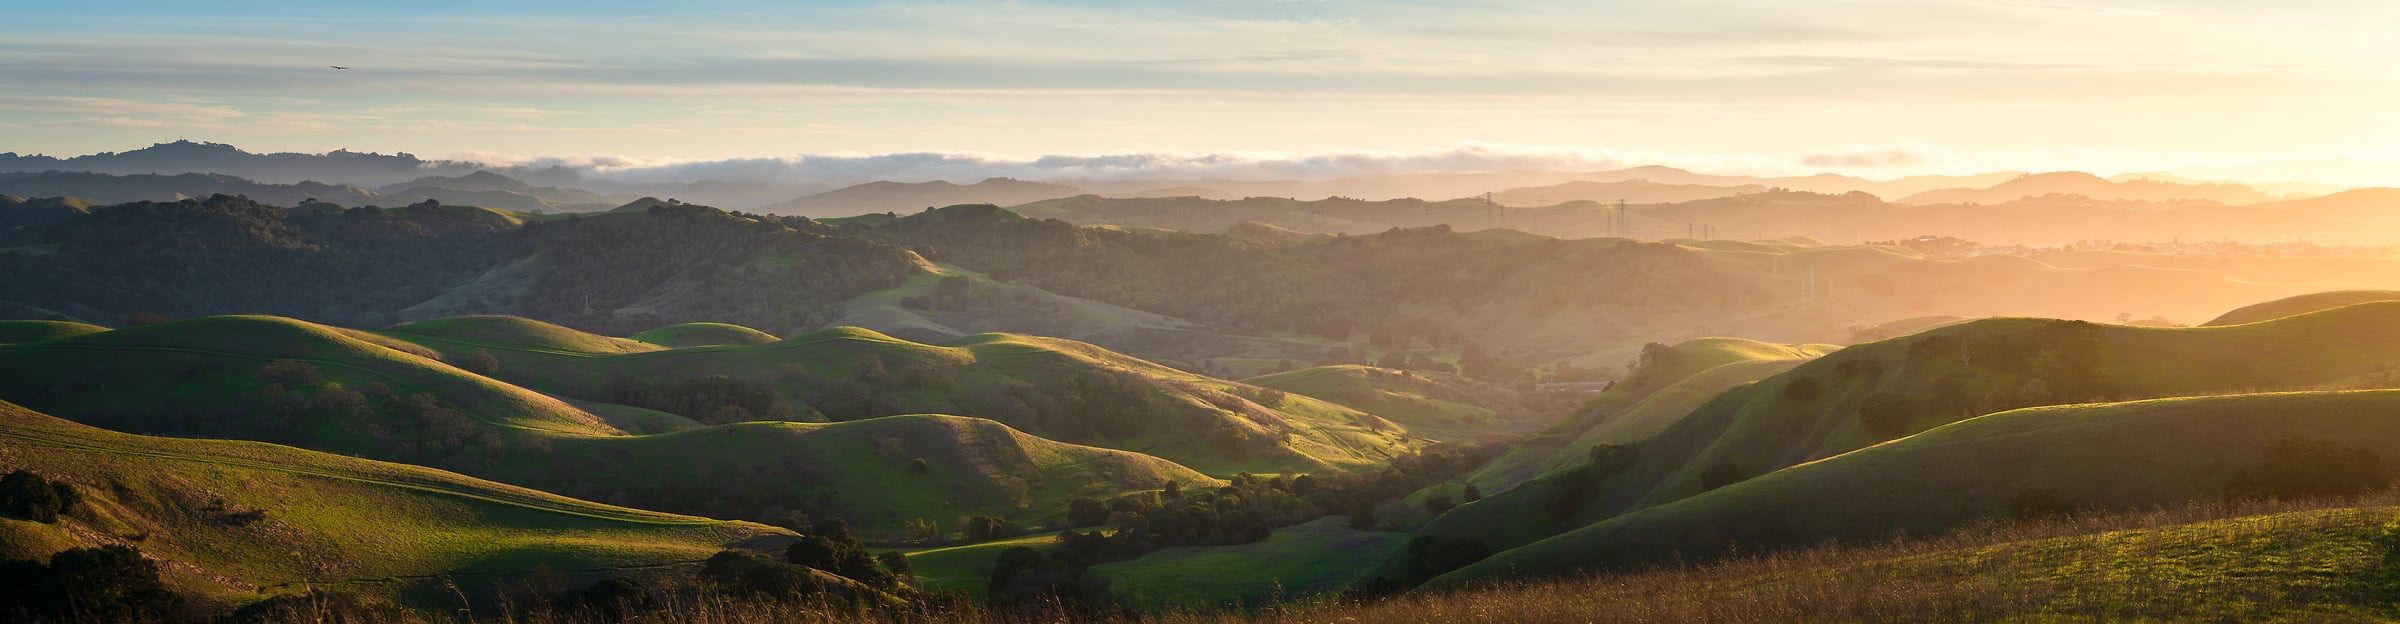 383 megapixels! A very high resolution, large-format VAST photo print of rolling hills at sunset; landscape photograph created by Jeff Lewis of the East Bay hills in the San Francisco Bay Area, California.